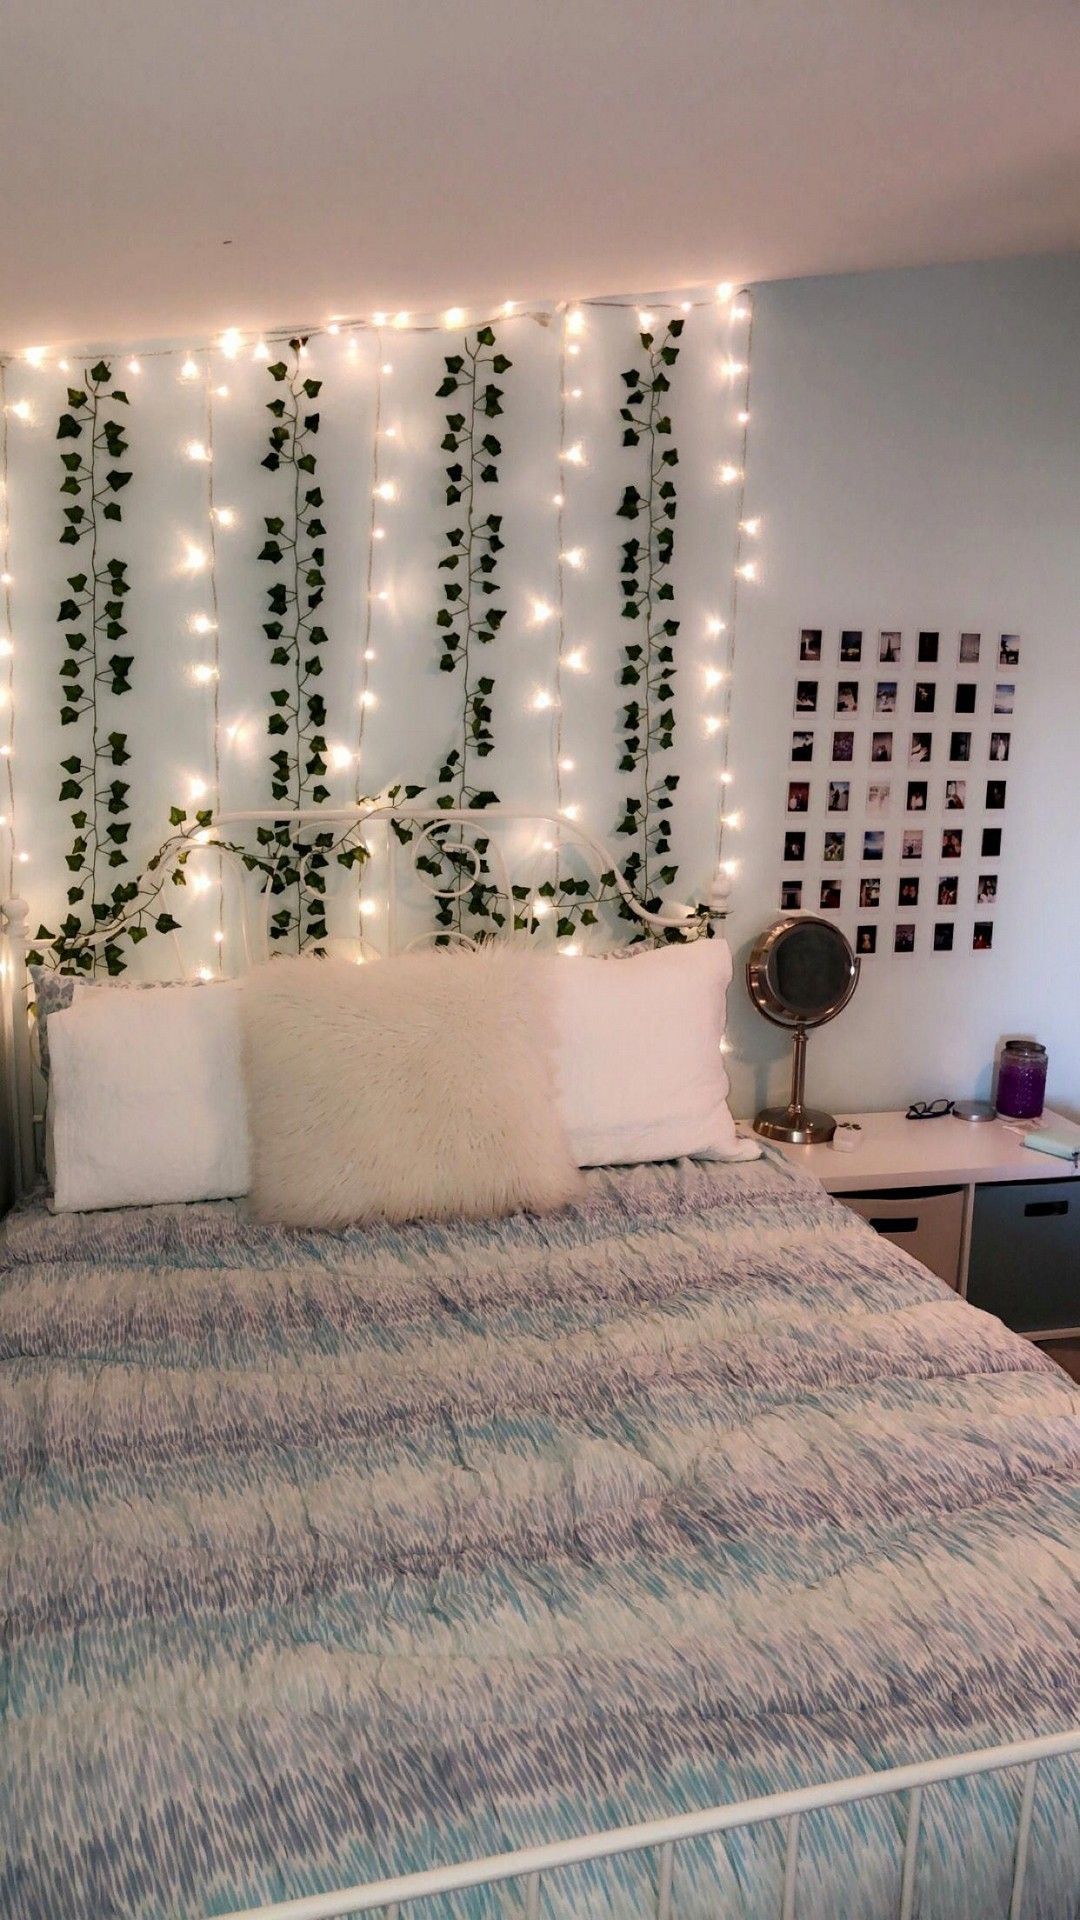 23 Cute Dorm Room Decor Ideas On This Page That We Just Love -   16 room decor Apartment design ideas